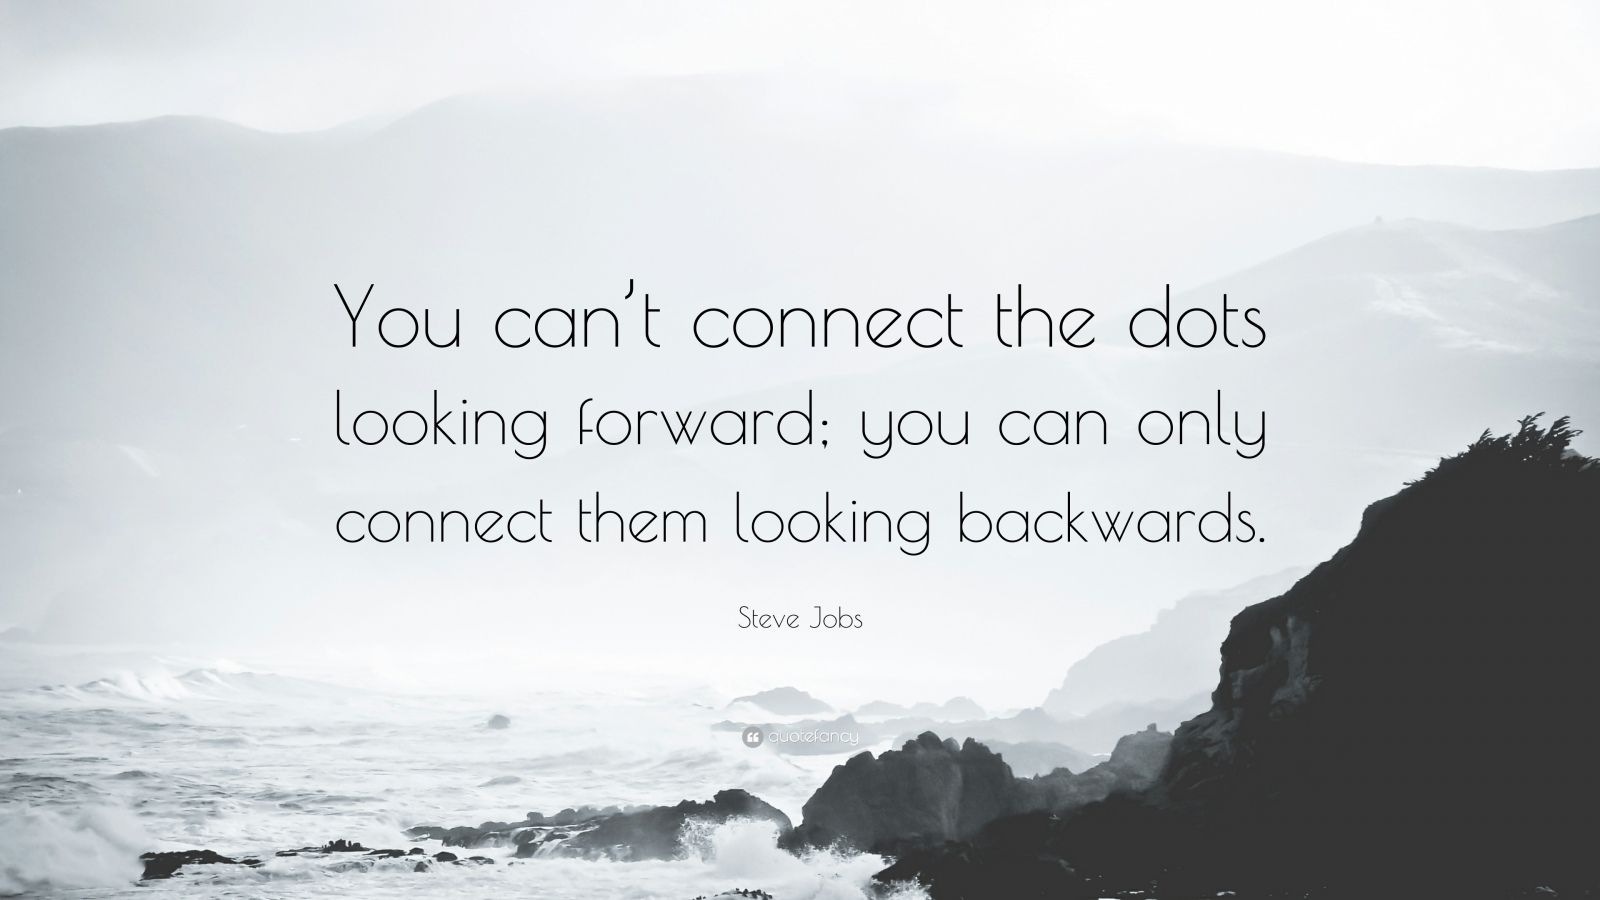 Steve Jobs Quote: “You can’t connect the dots looking forward; you can